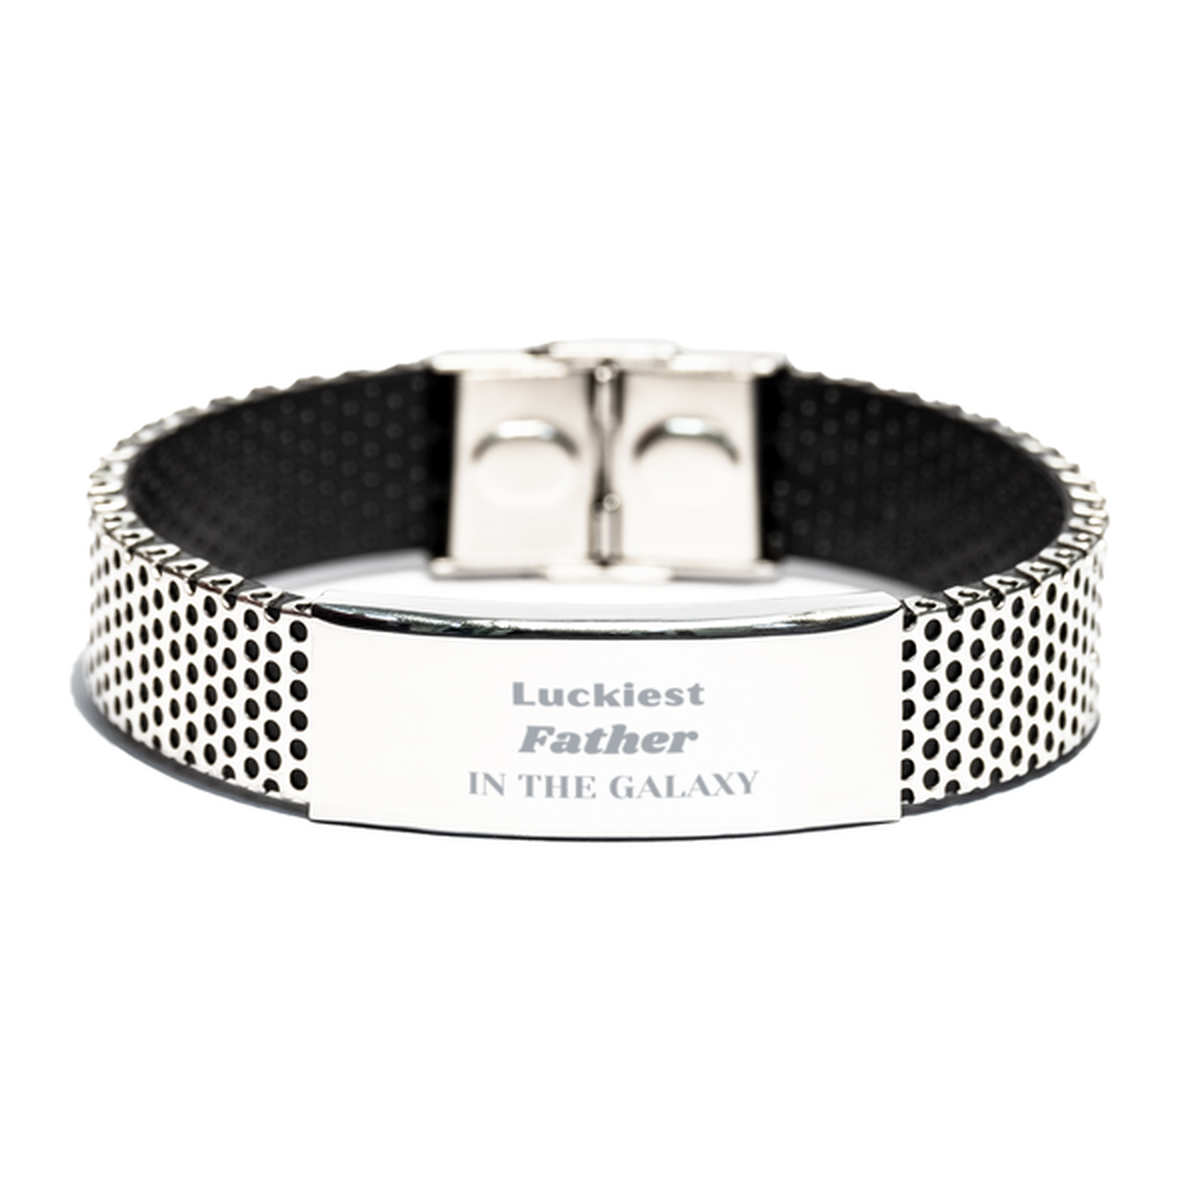 Luckiest Father in the Galaxy, To My Father Engraved Gifts, Christmas Father Stainless Steel Bracelet Gifts, X-mas Birthday Unique Gifts For Father Men Women